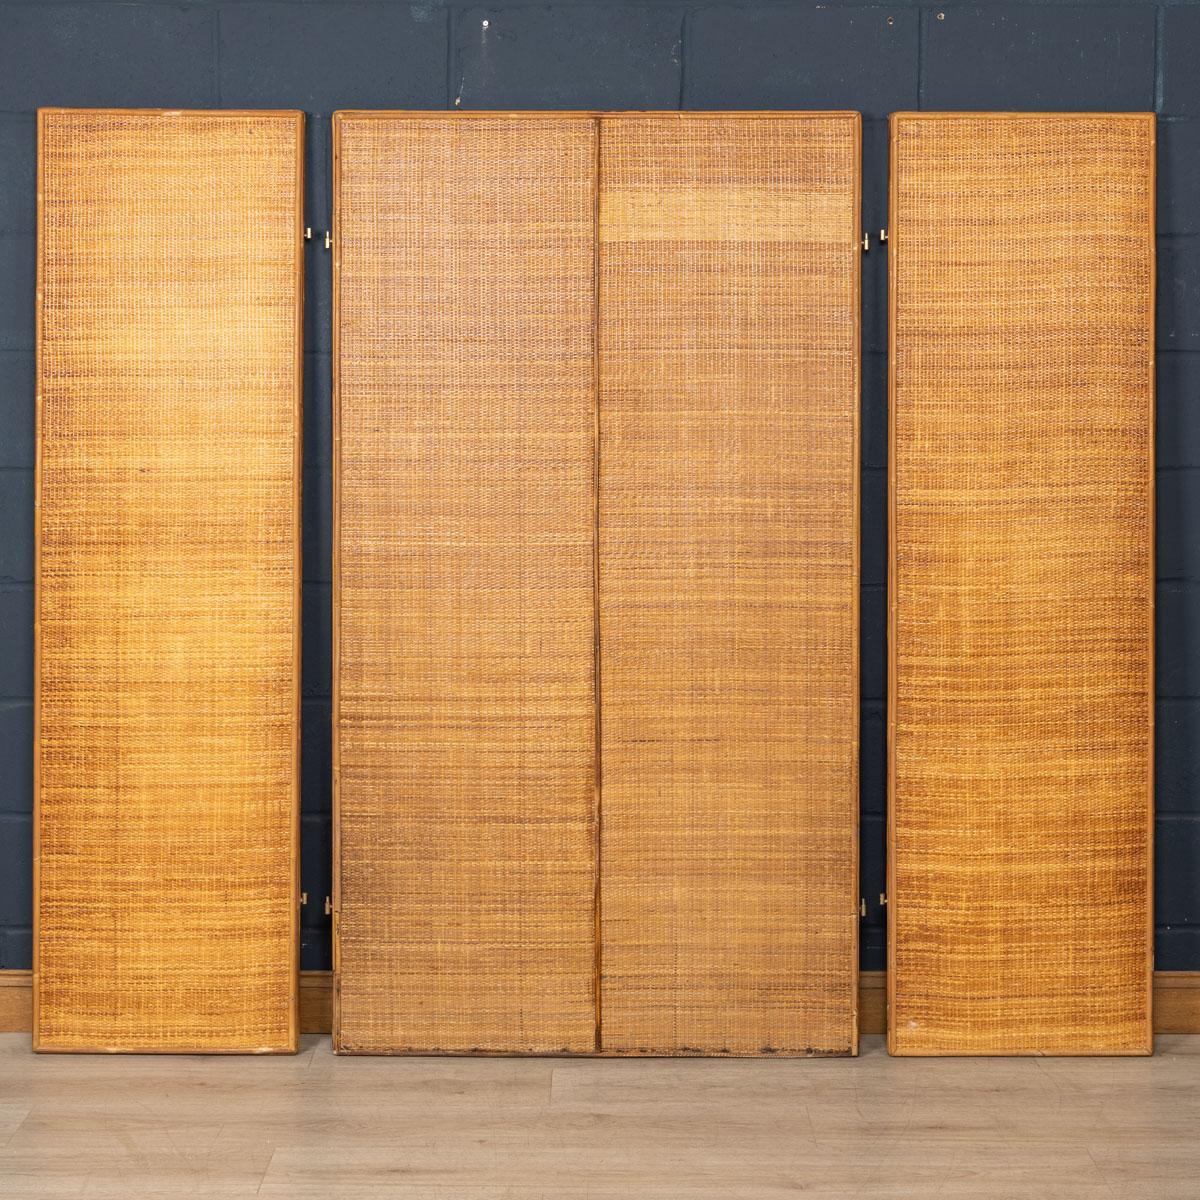 An extremely stylish bamboo room divider (or screen) manufactured by Vivai Del Sud in Italy in the 1970s. This mid century mirrored bifold screen is a statement piece which is part of Maurizio Mariani and Giusto Puri Purini's 'Palm Beach Regency'